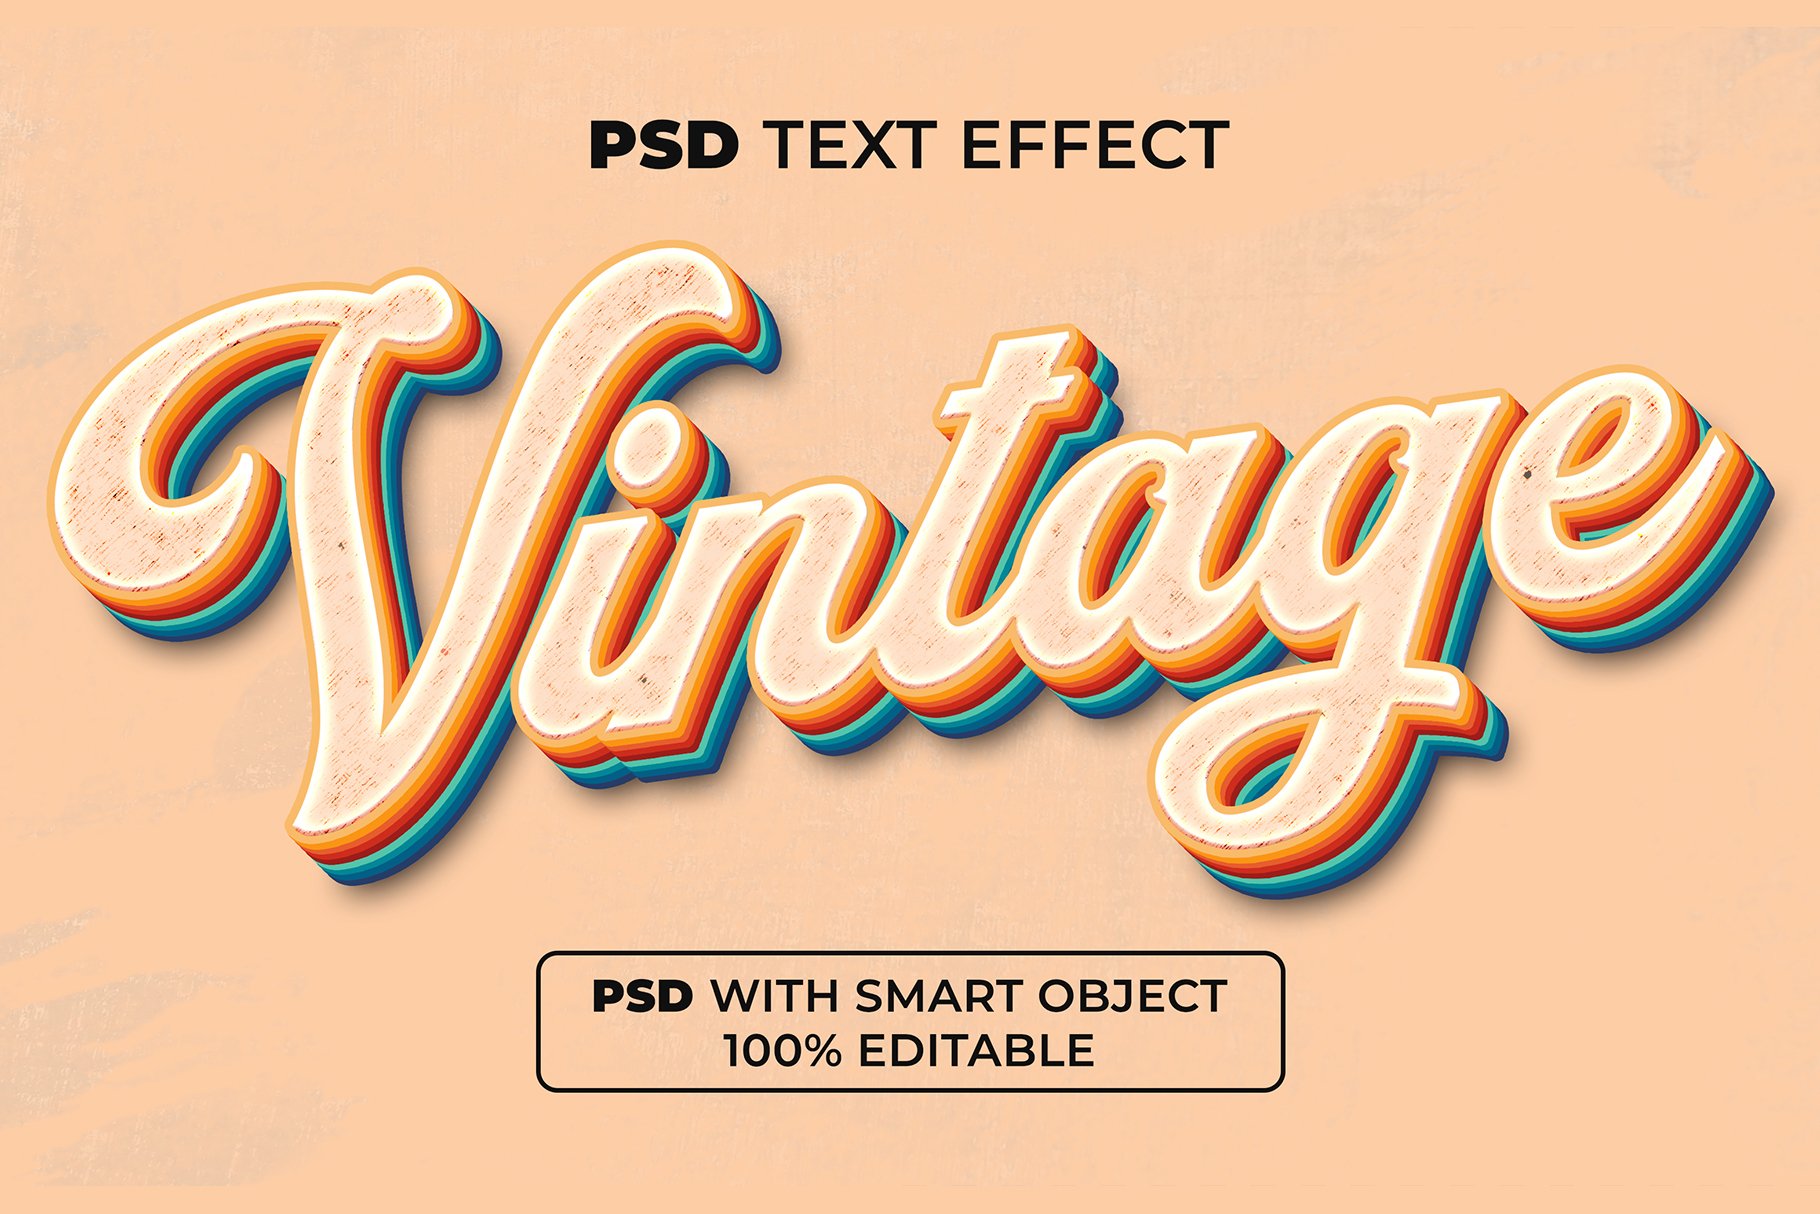 Vintage Text Effect Stylecover image.